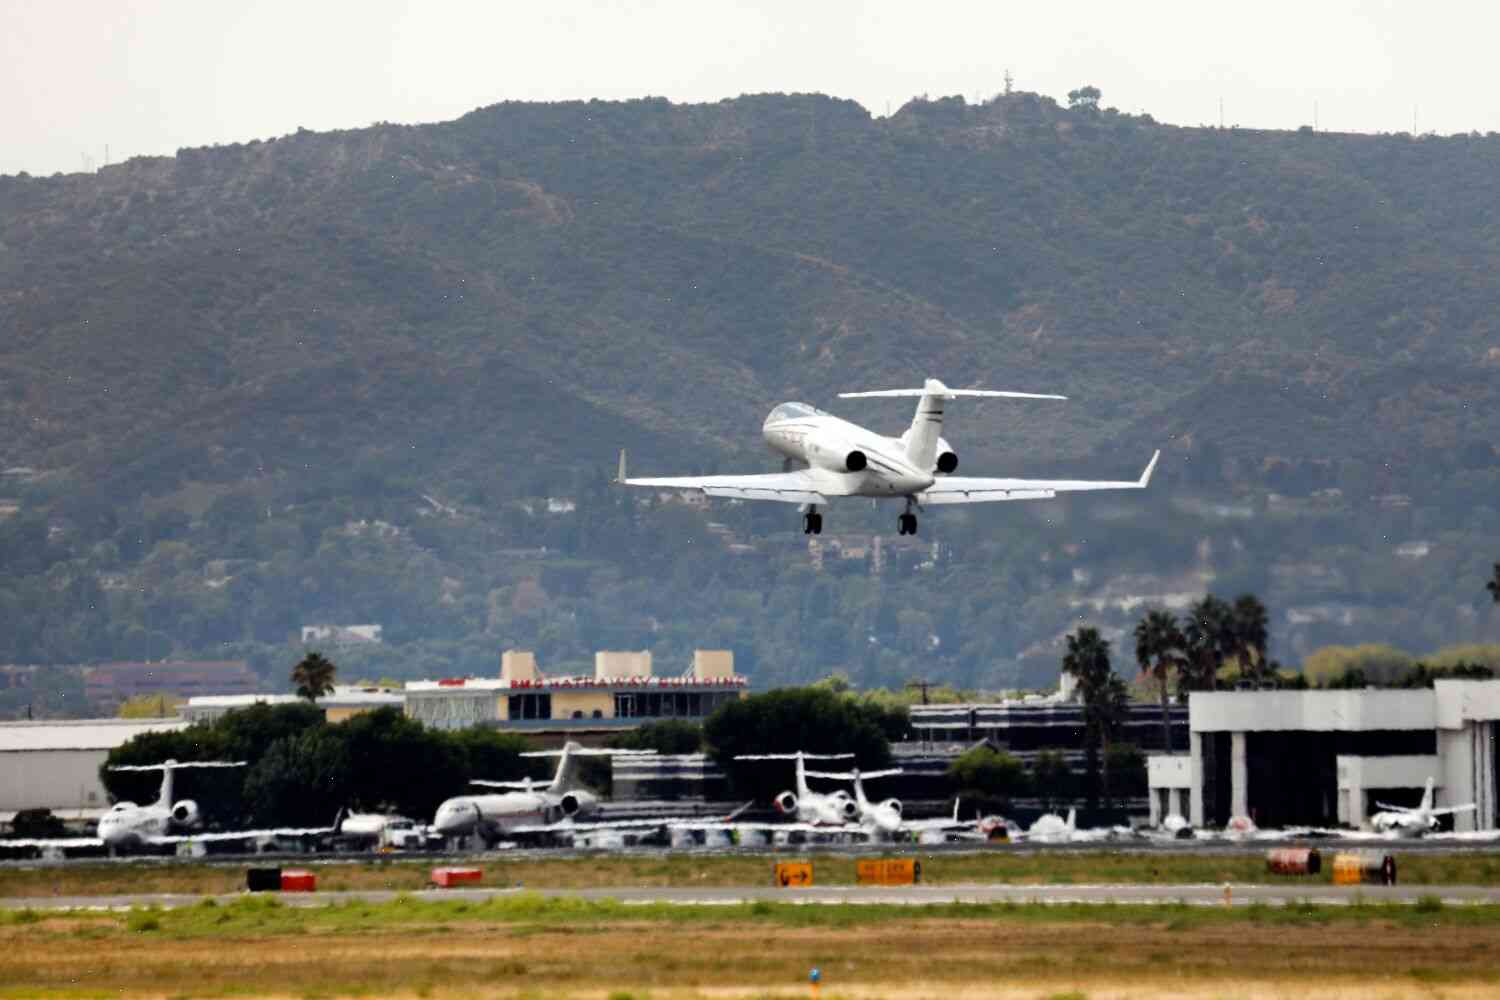 Lost luggage is a problem at Van Nuys Airport